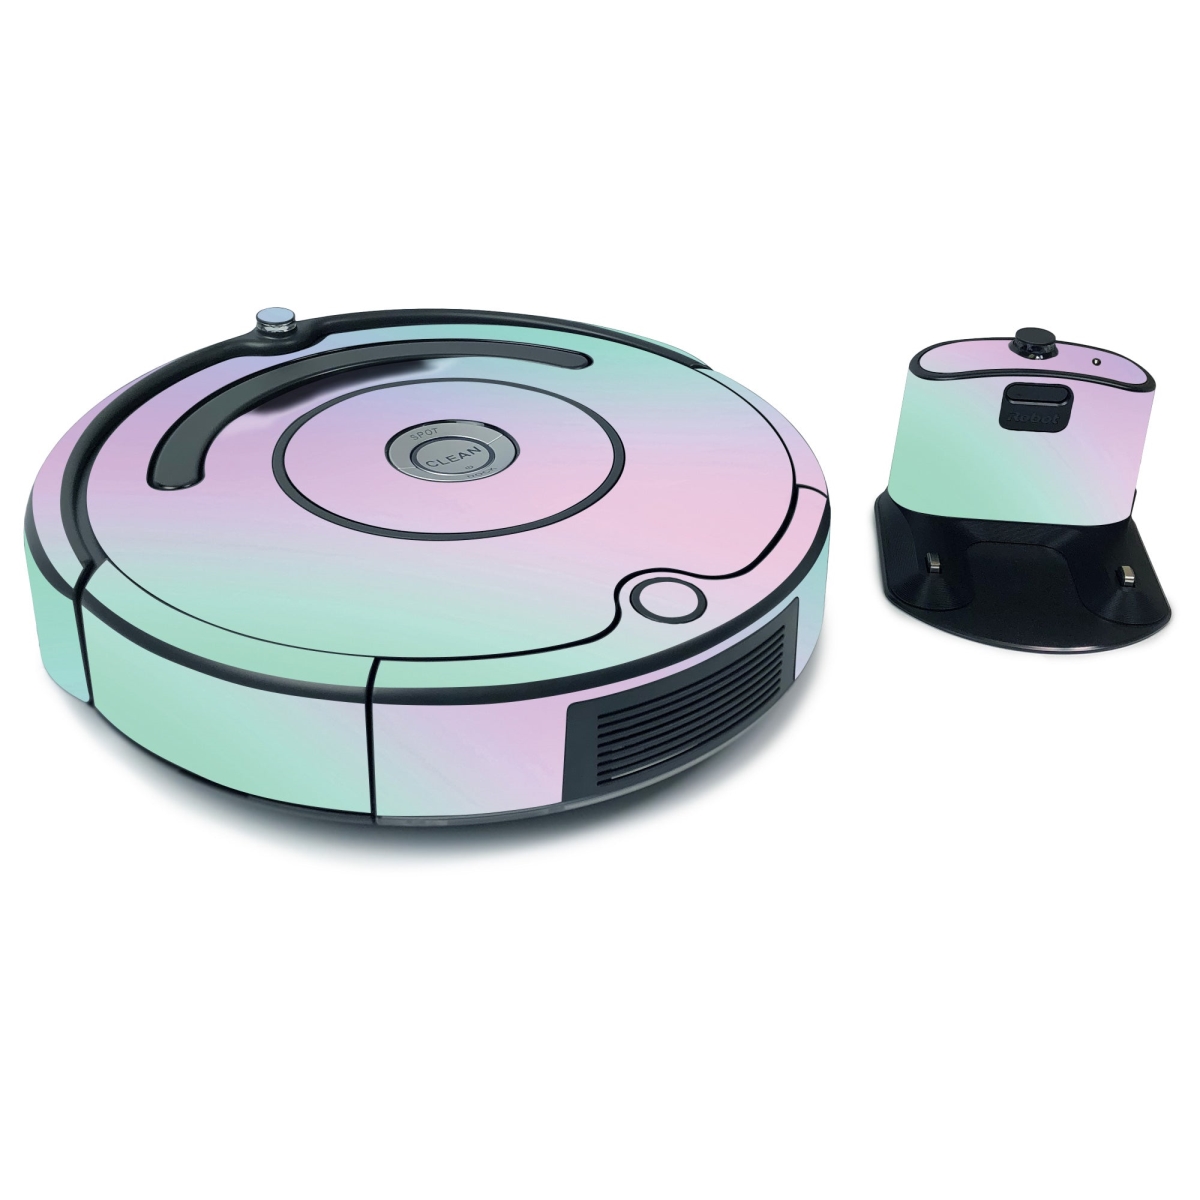 Picture of MightySkins IRRO675-Cotton Candy Skin for iRobot Roomba 675 Max Coverage - Cotton Candy